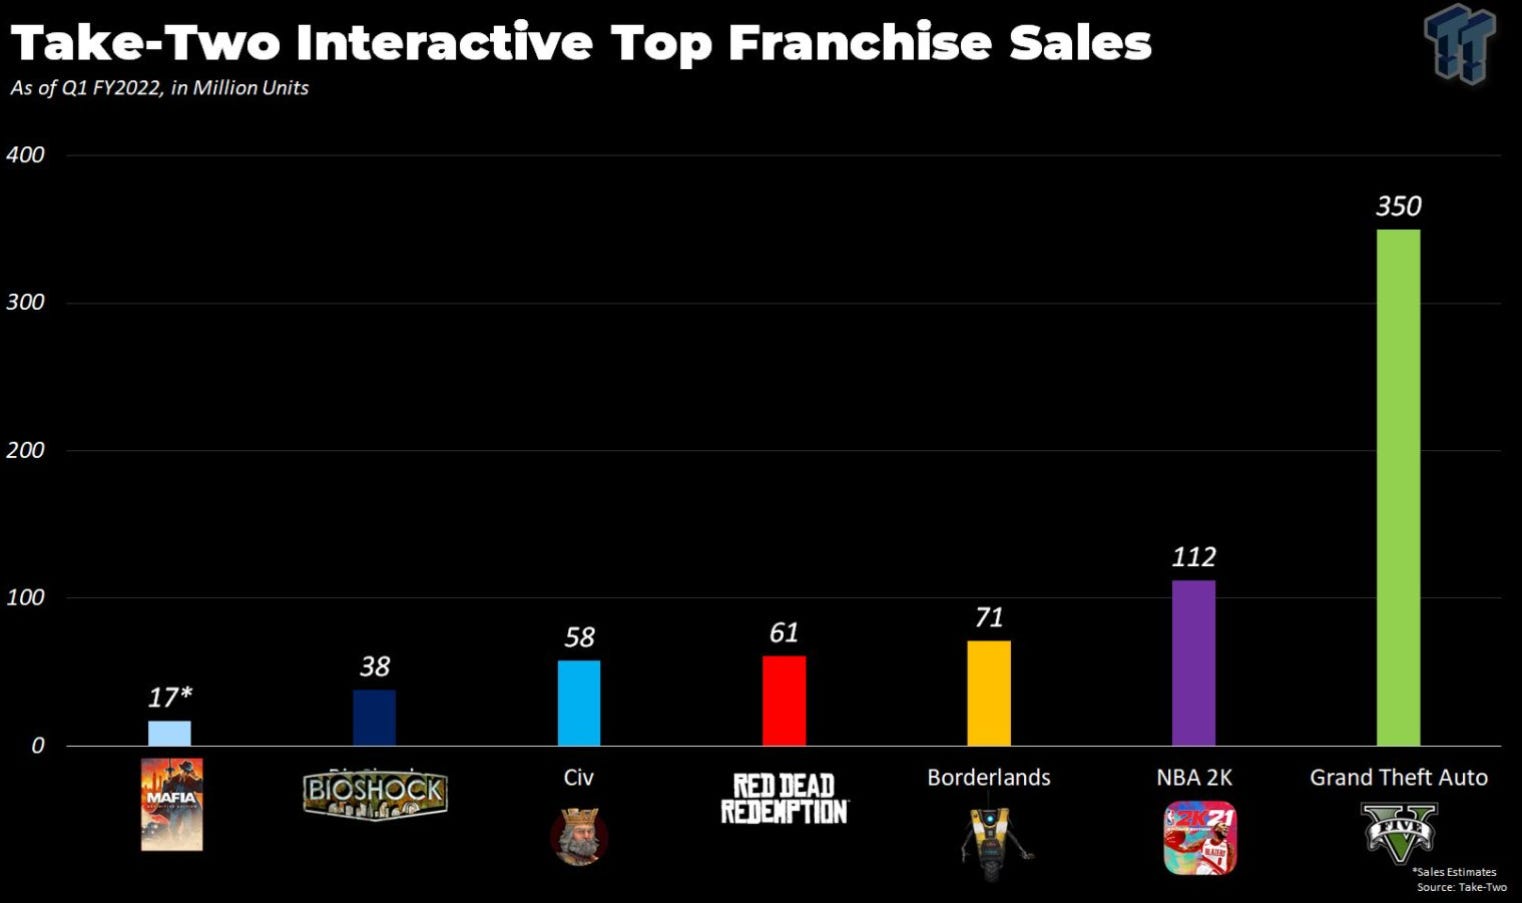 Take-Two Interactive Top Franchise Sales 
As of QI FY2022, in Million Units 
400 
300 
200 
100 
38 
IOS OCS 
58 
Civ 
61 
REDDEAD 
REEIPTION 
71 
Borderlands 
112 
NBA 2K 
350 
Grand Theft Auto 
FIVE 
•Sa les Estimates 
Source TakeTwo 